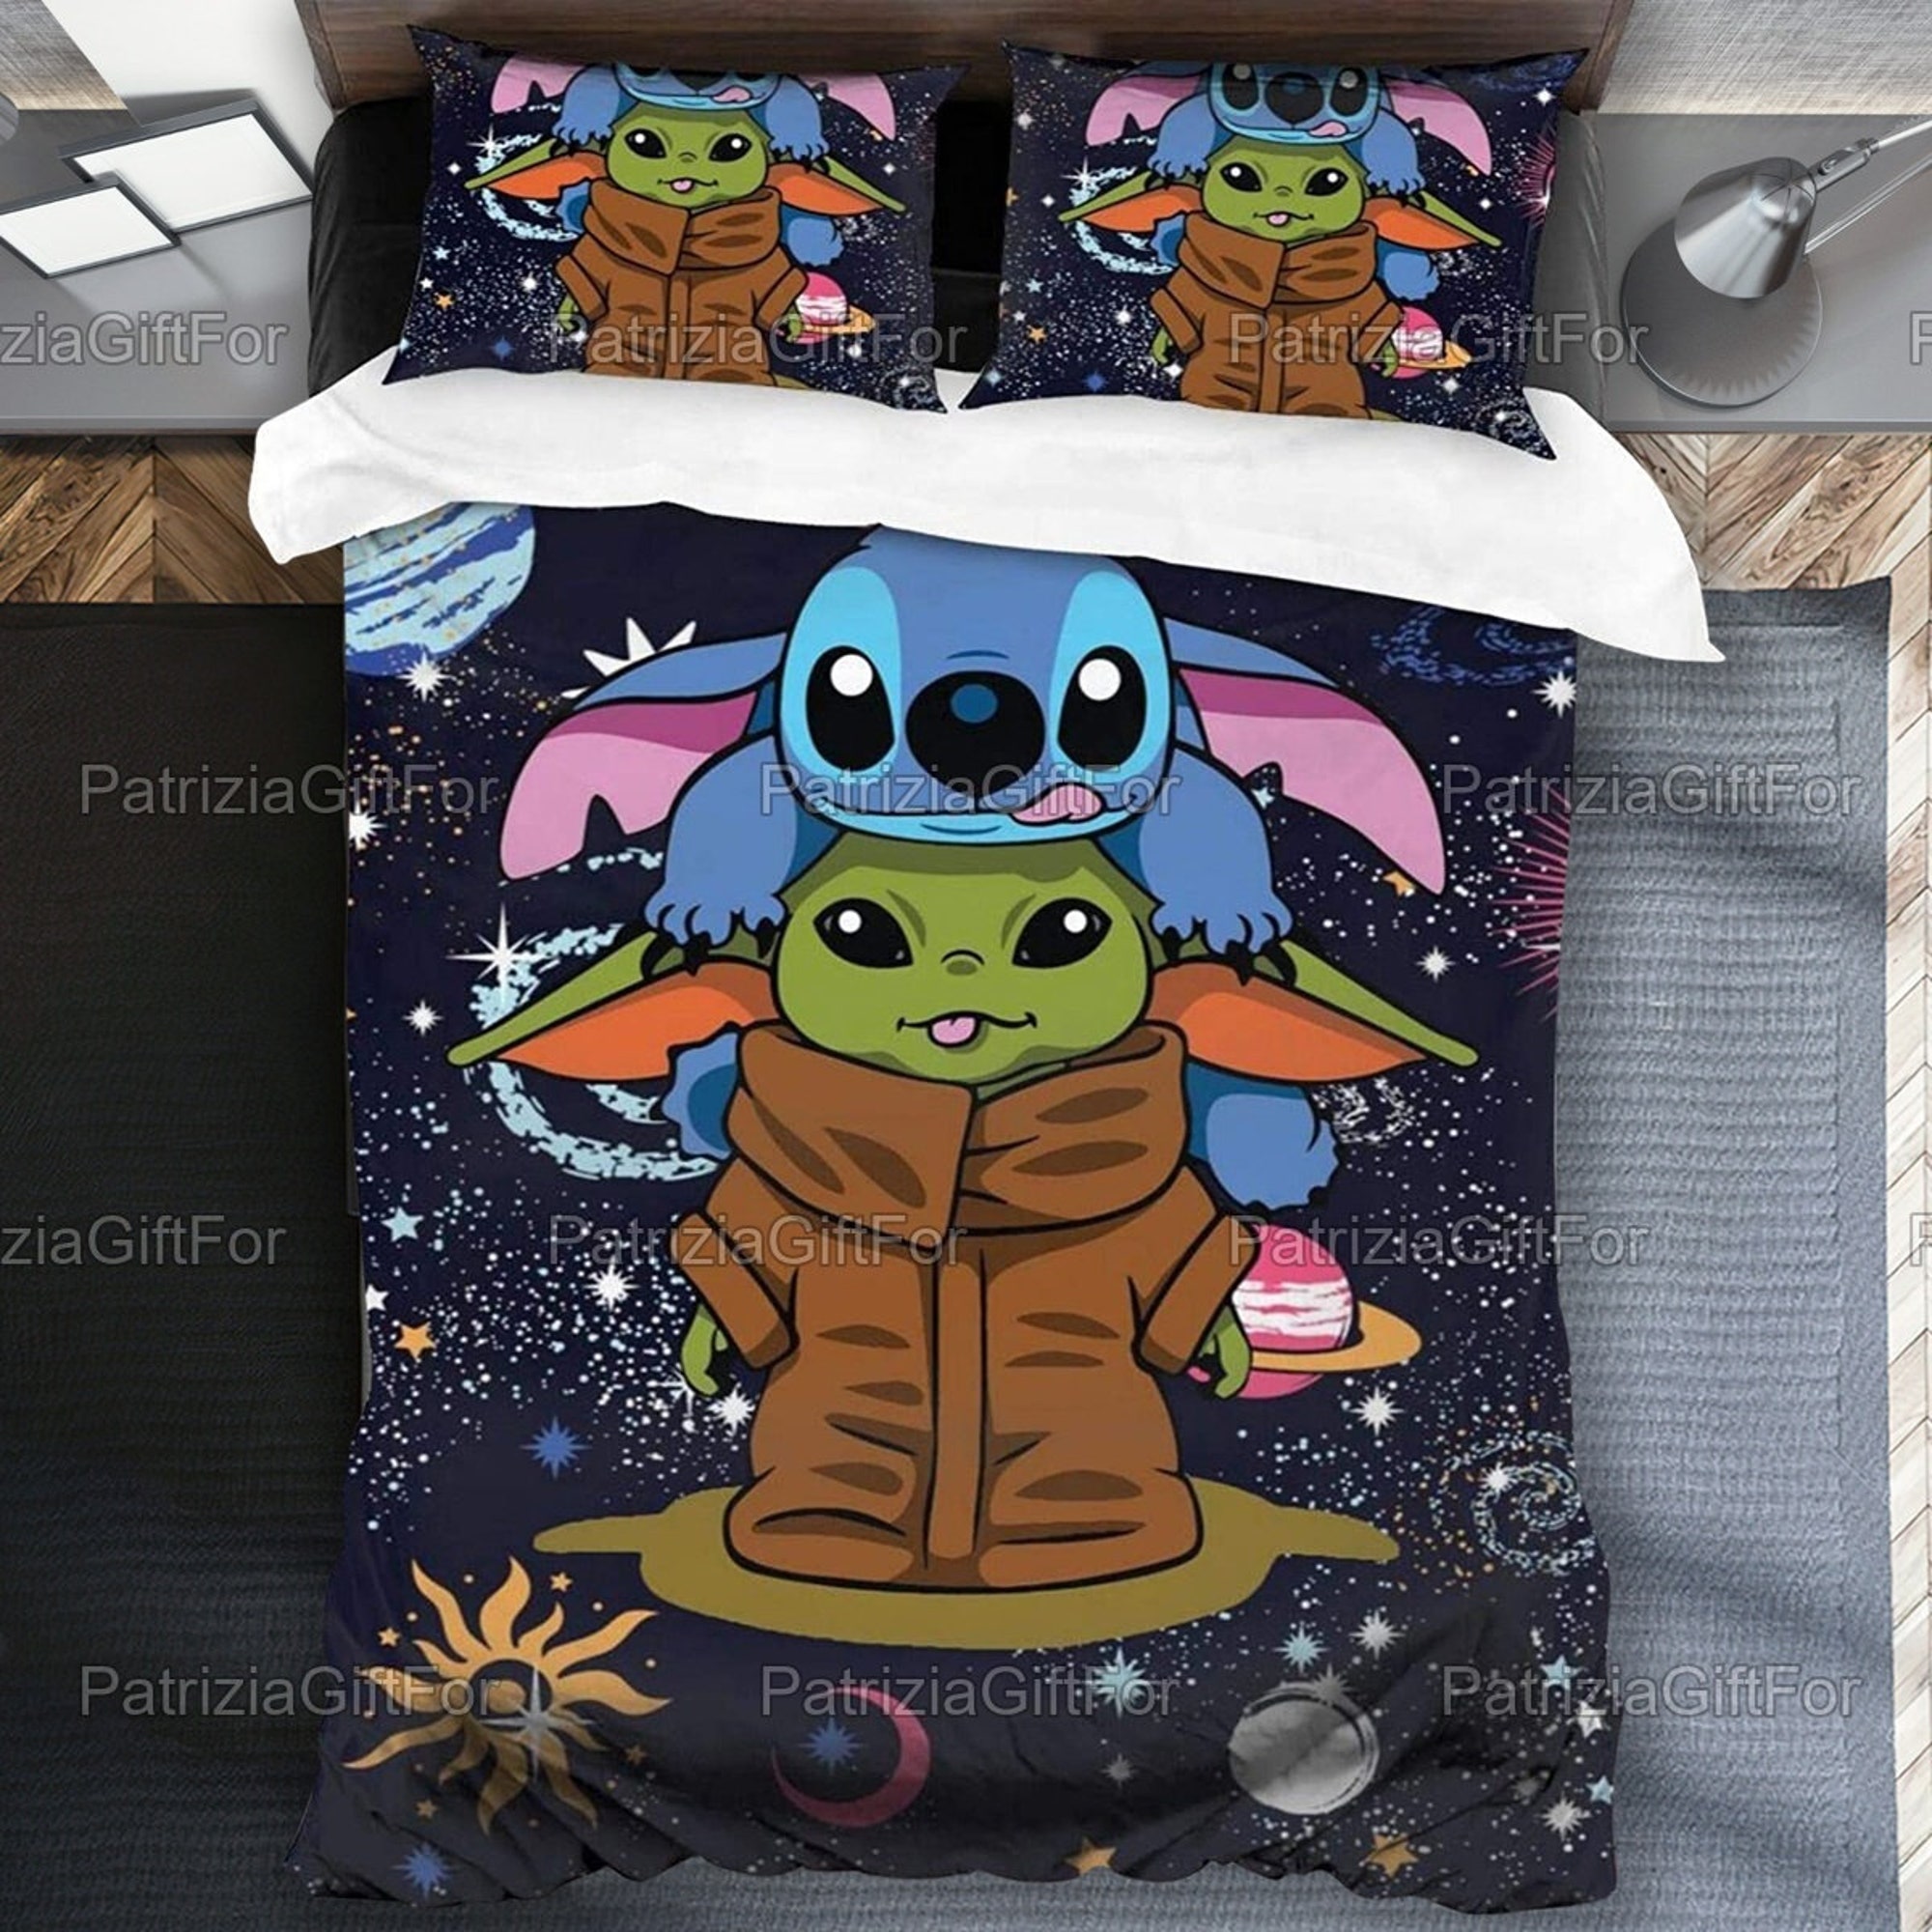 Stitch Baby Yoda Bedding Set And Two Pillow Case, Baby Yoda Bedding, Stitch Bedding, Stitch Lover, Gifts For Her, Mother Gift LNG252201A11